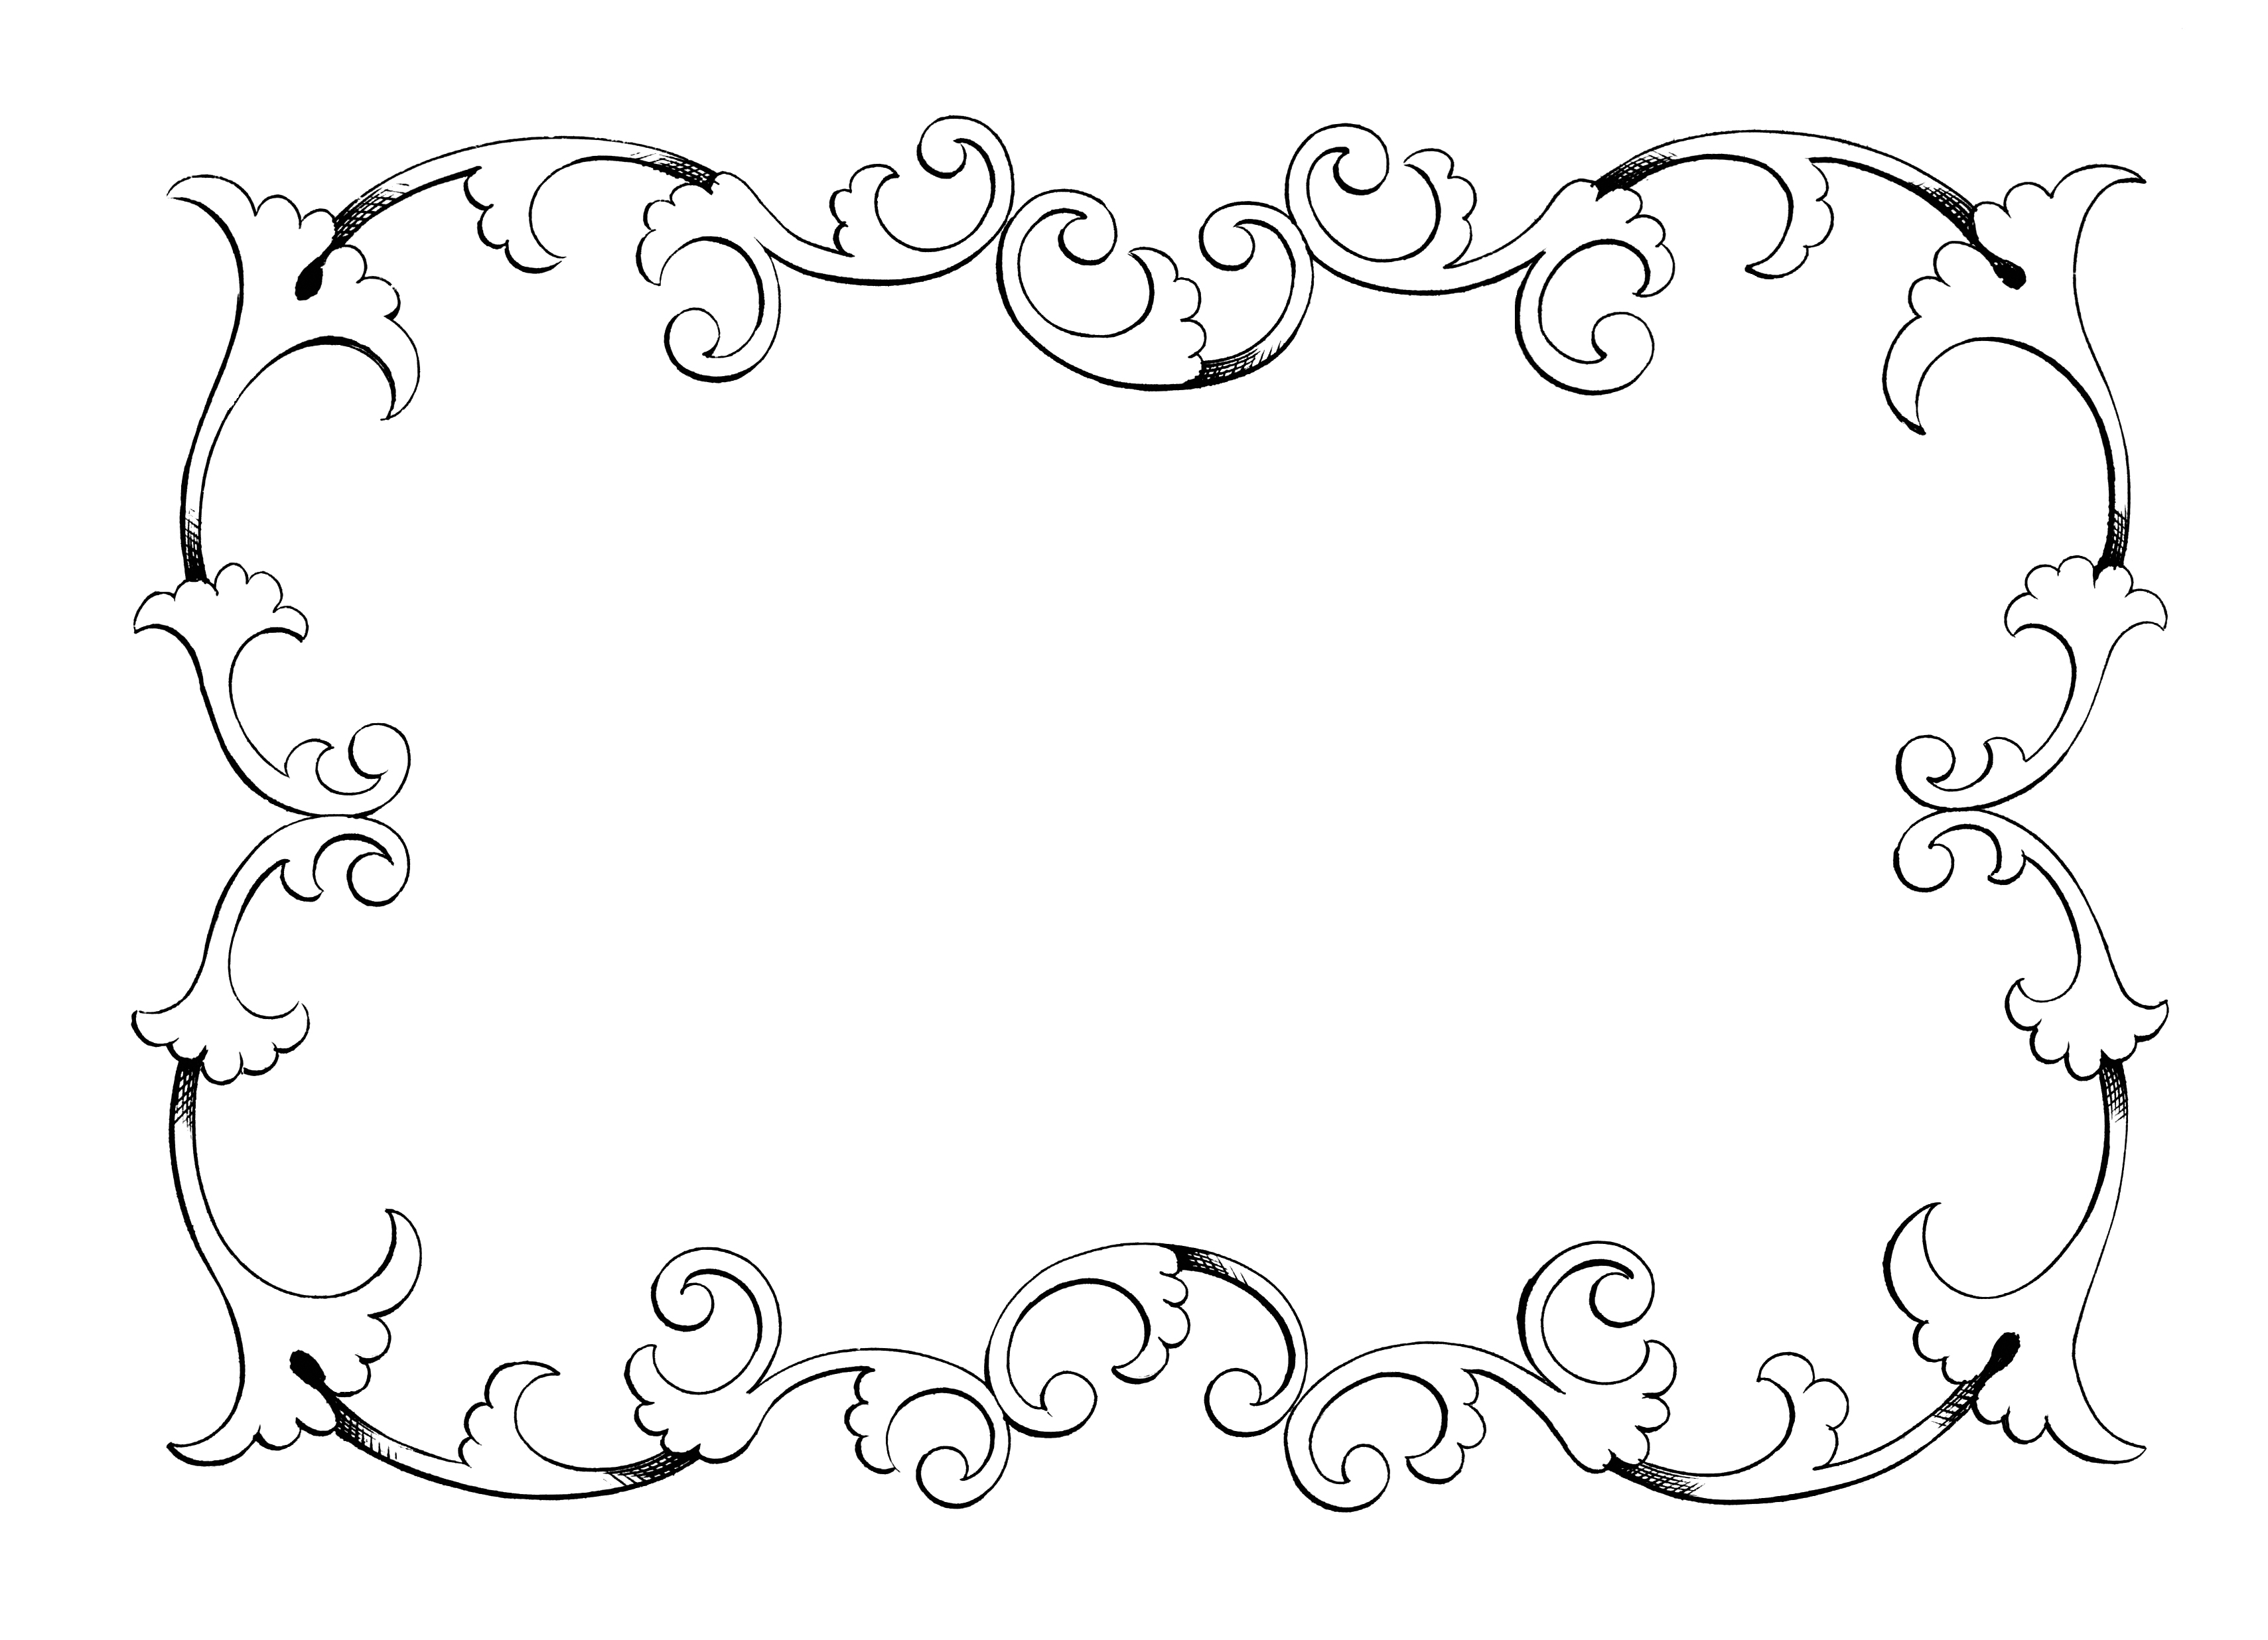 Clip art frame border freebie oh so nifty vintage graphics